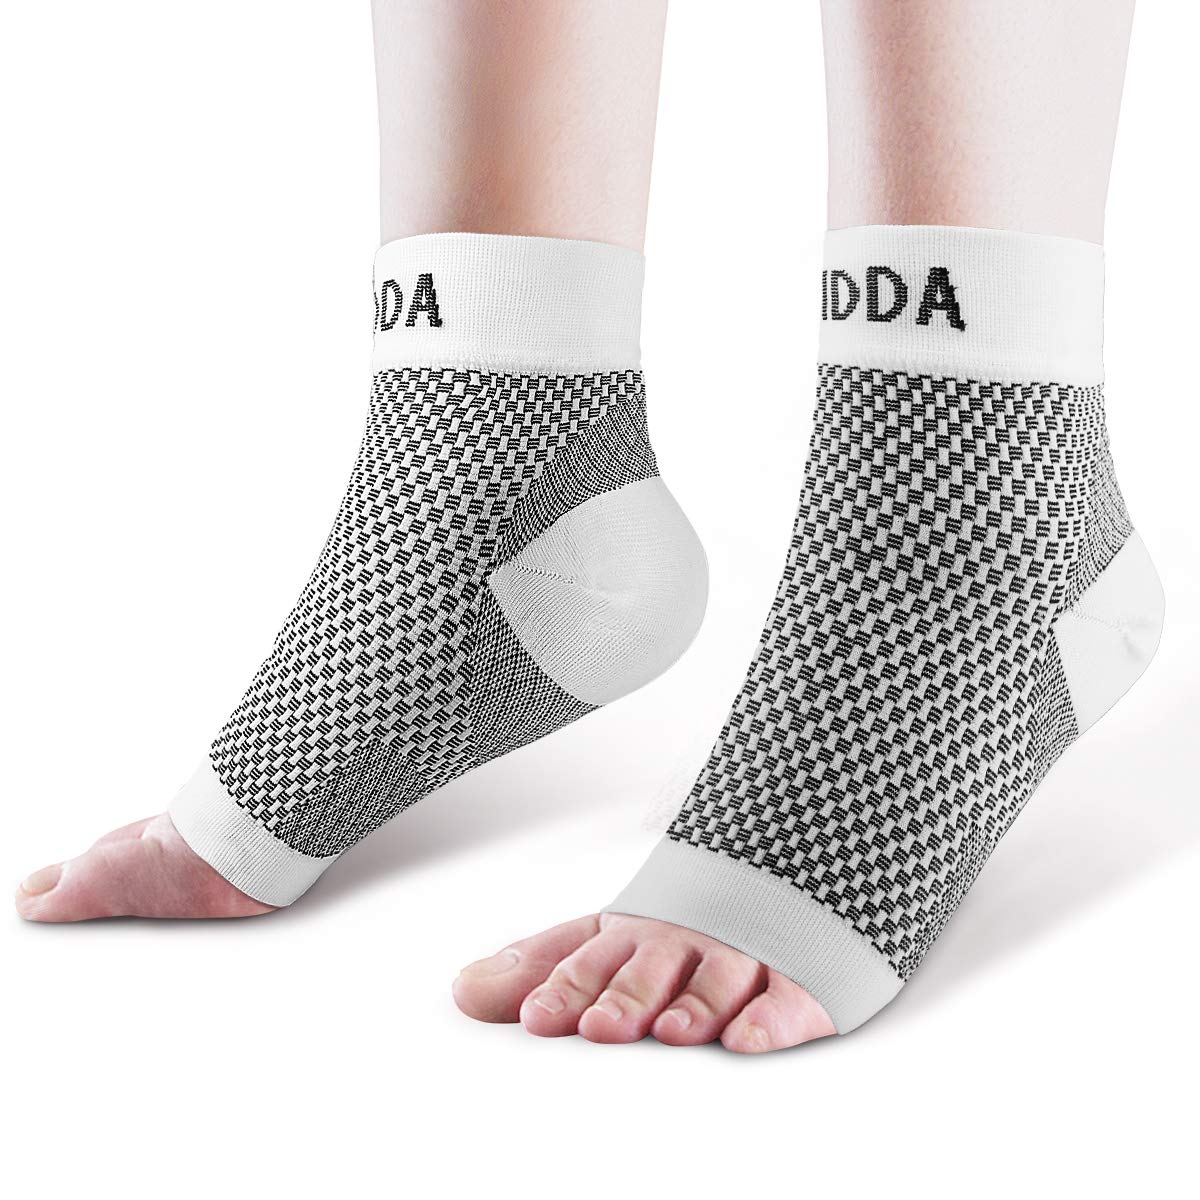 AVIDDA Plantar Fasciitis Socks with Heels Arch Supports, Compression Sleeves Ideal for Arthritis Pain Relief and Suitable for Sports, Ankle Supports for Men and Women White-1-L